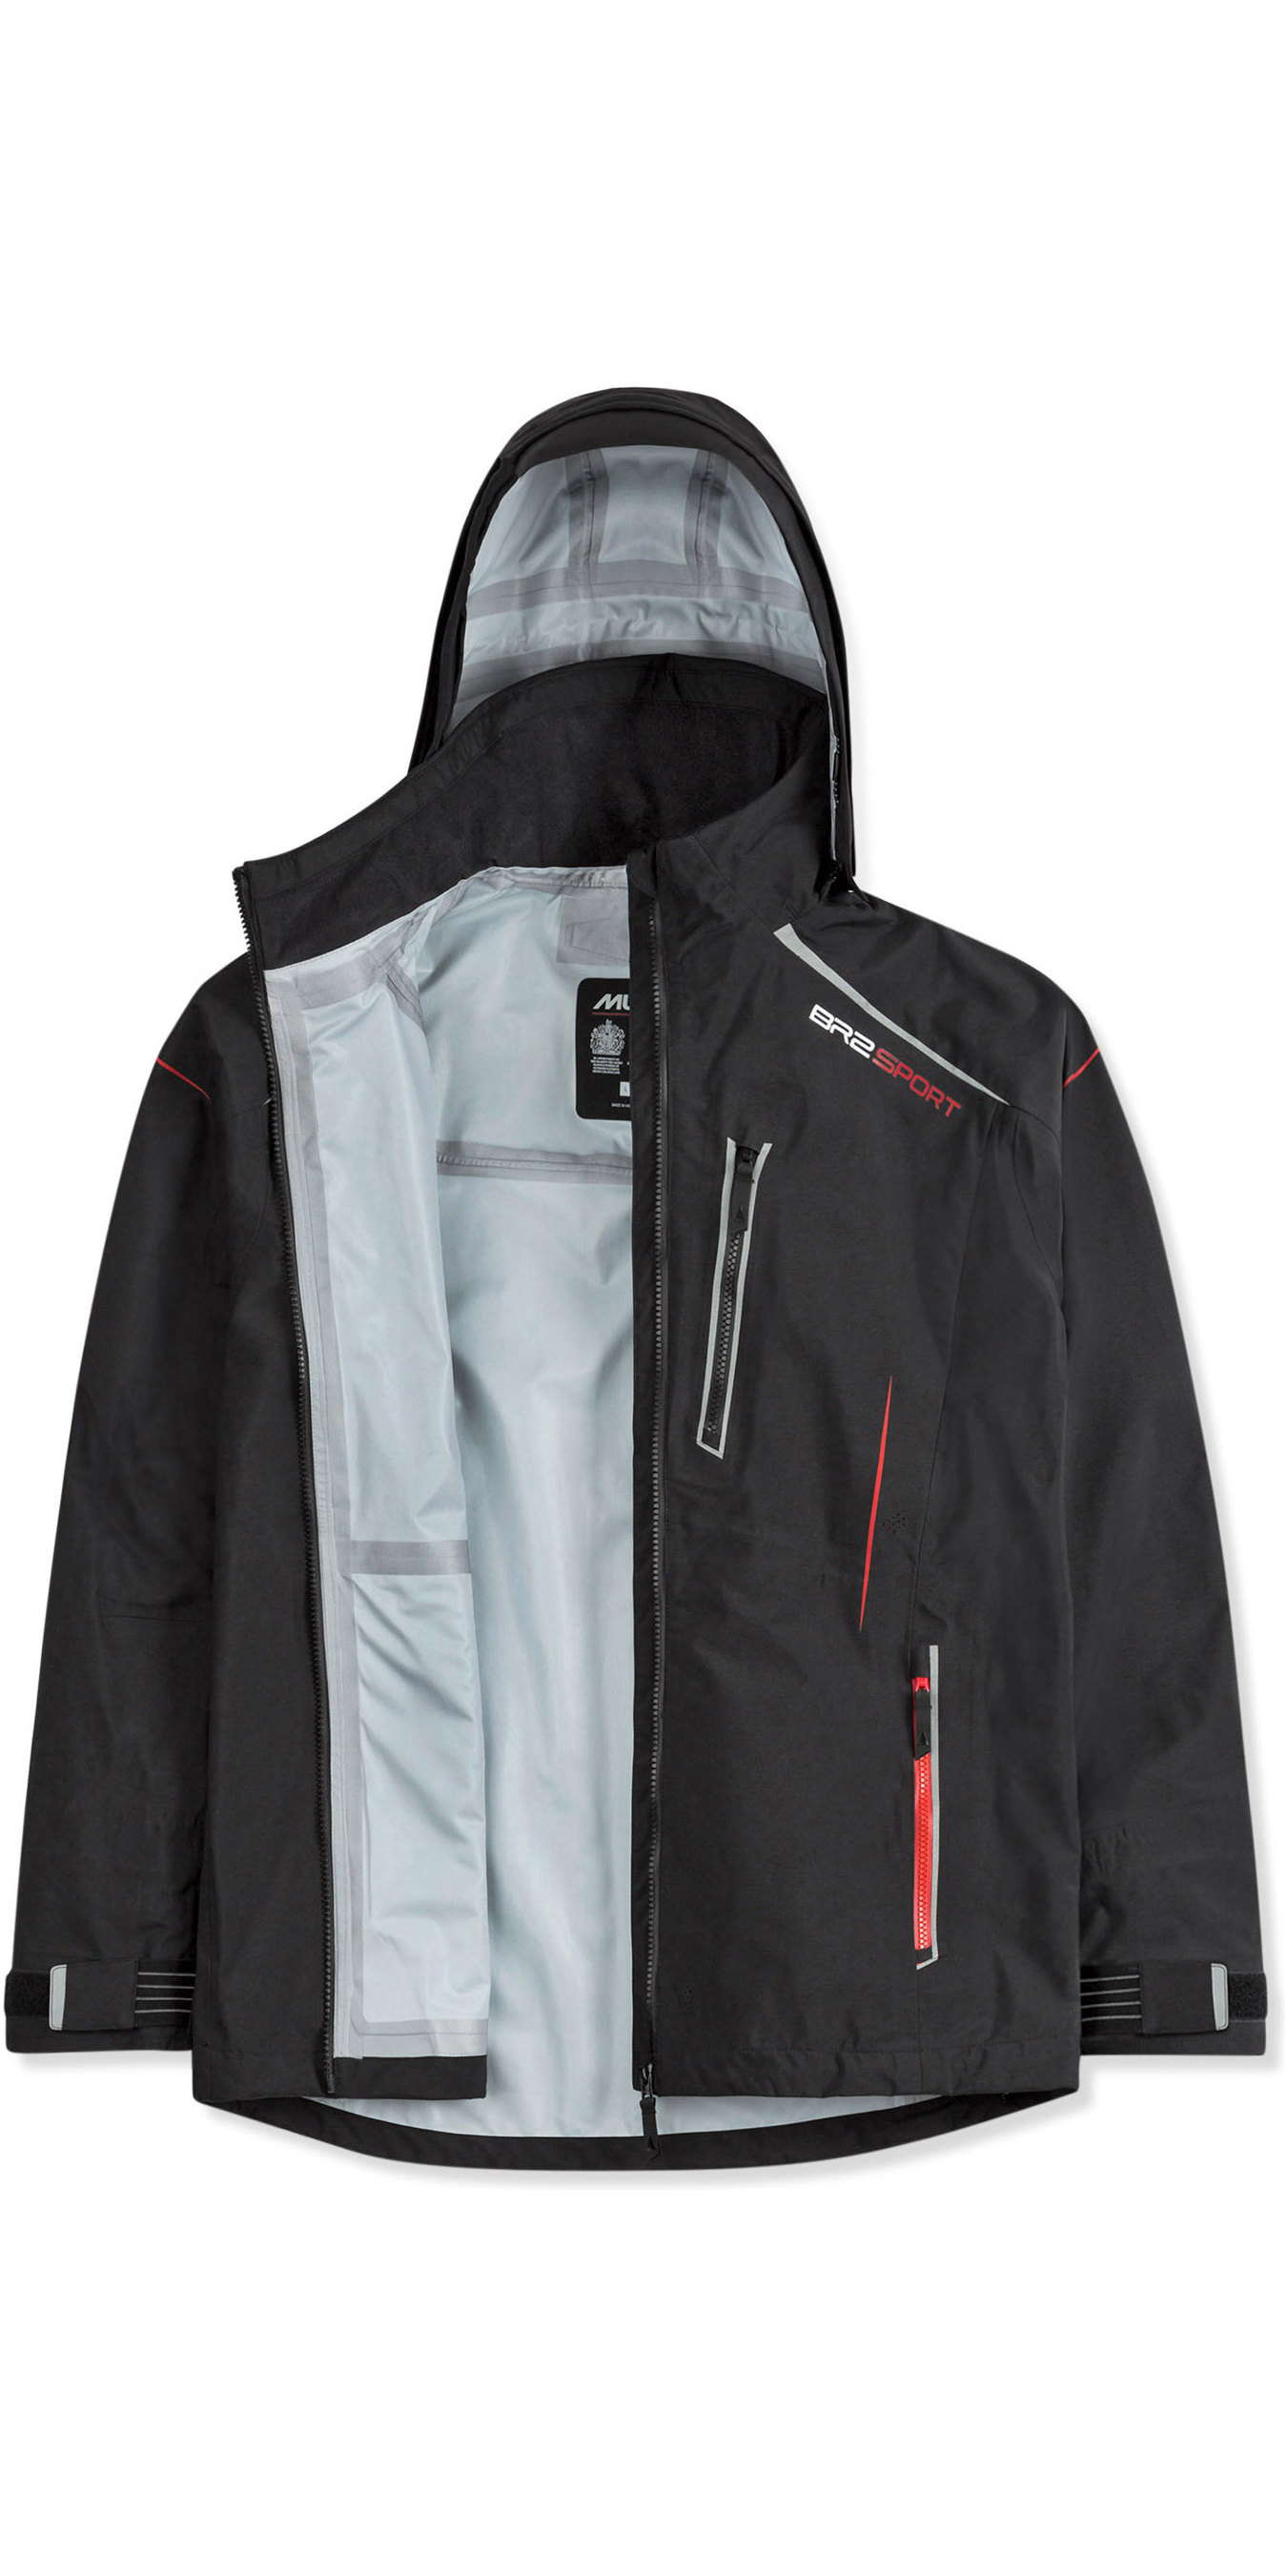 2021 Musto BR2 Sport Jacket Black 80831 - Sailing - Sailing - Yacht - Jackets | Watersports Outlet